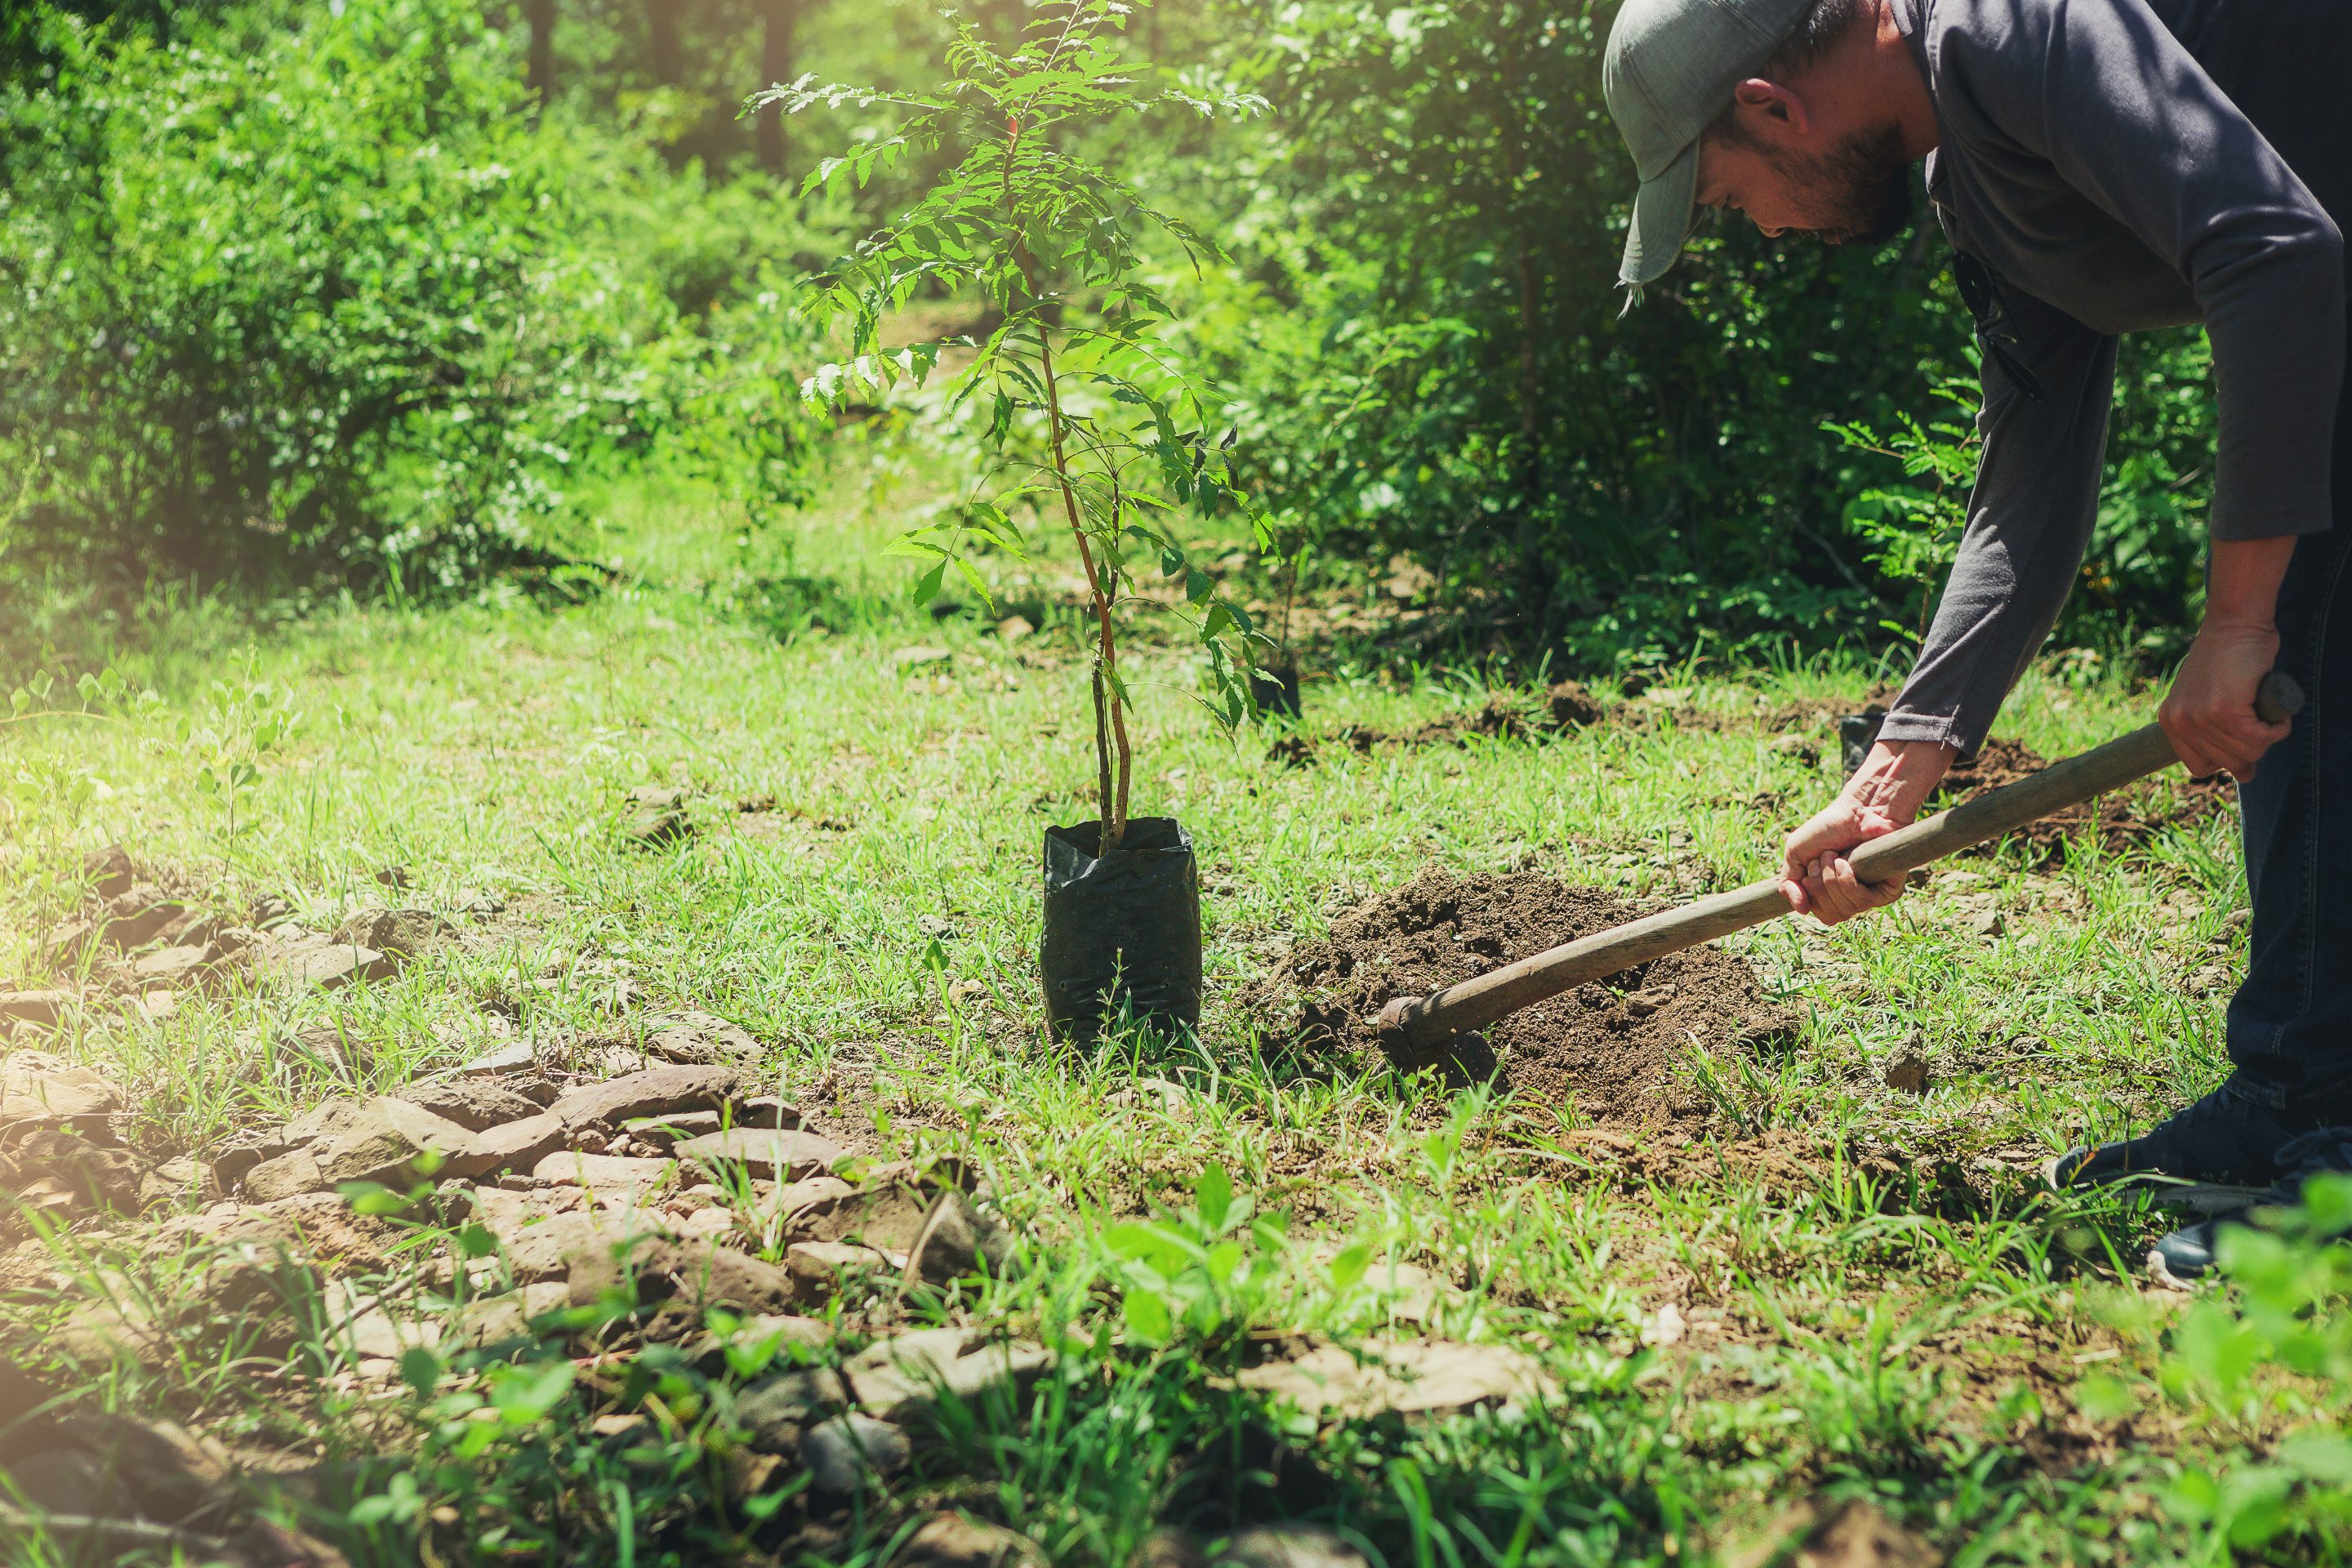 A man planting a baby tree in a wooded area.